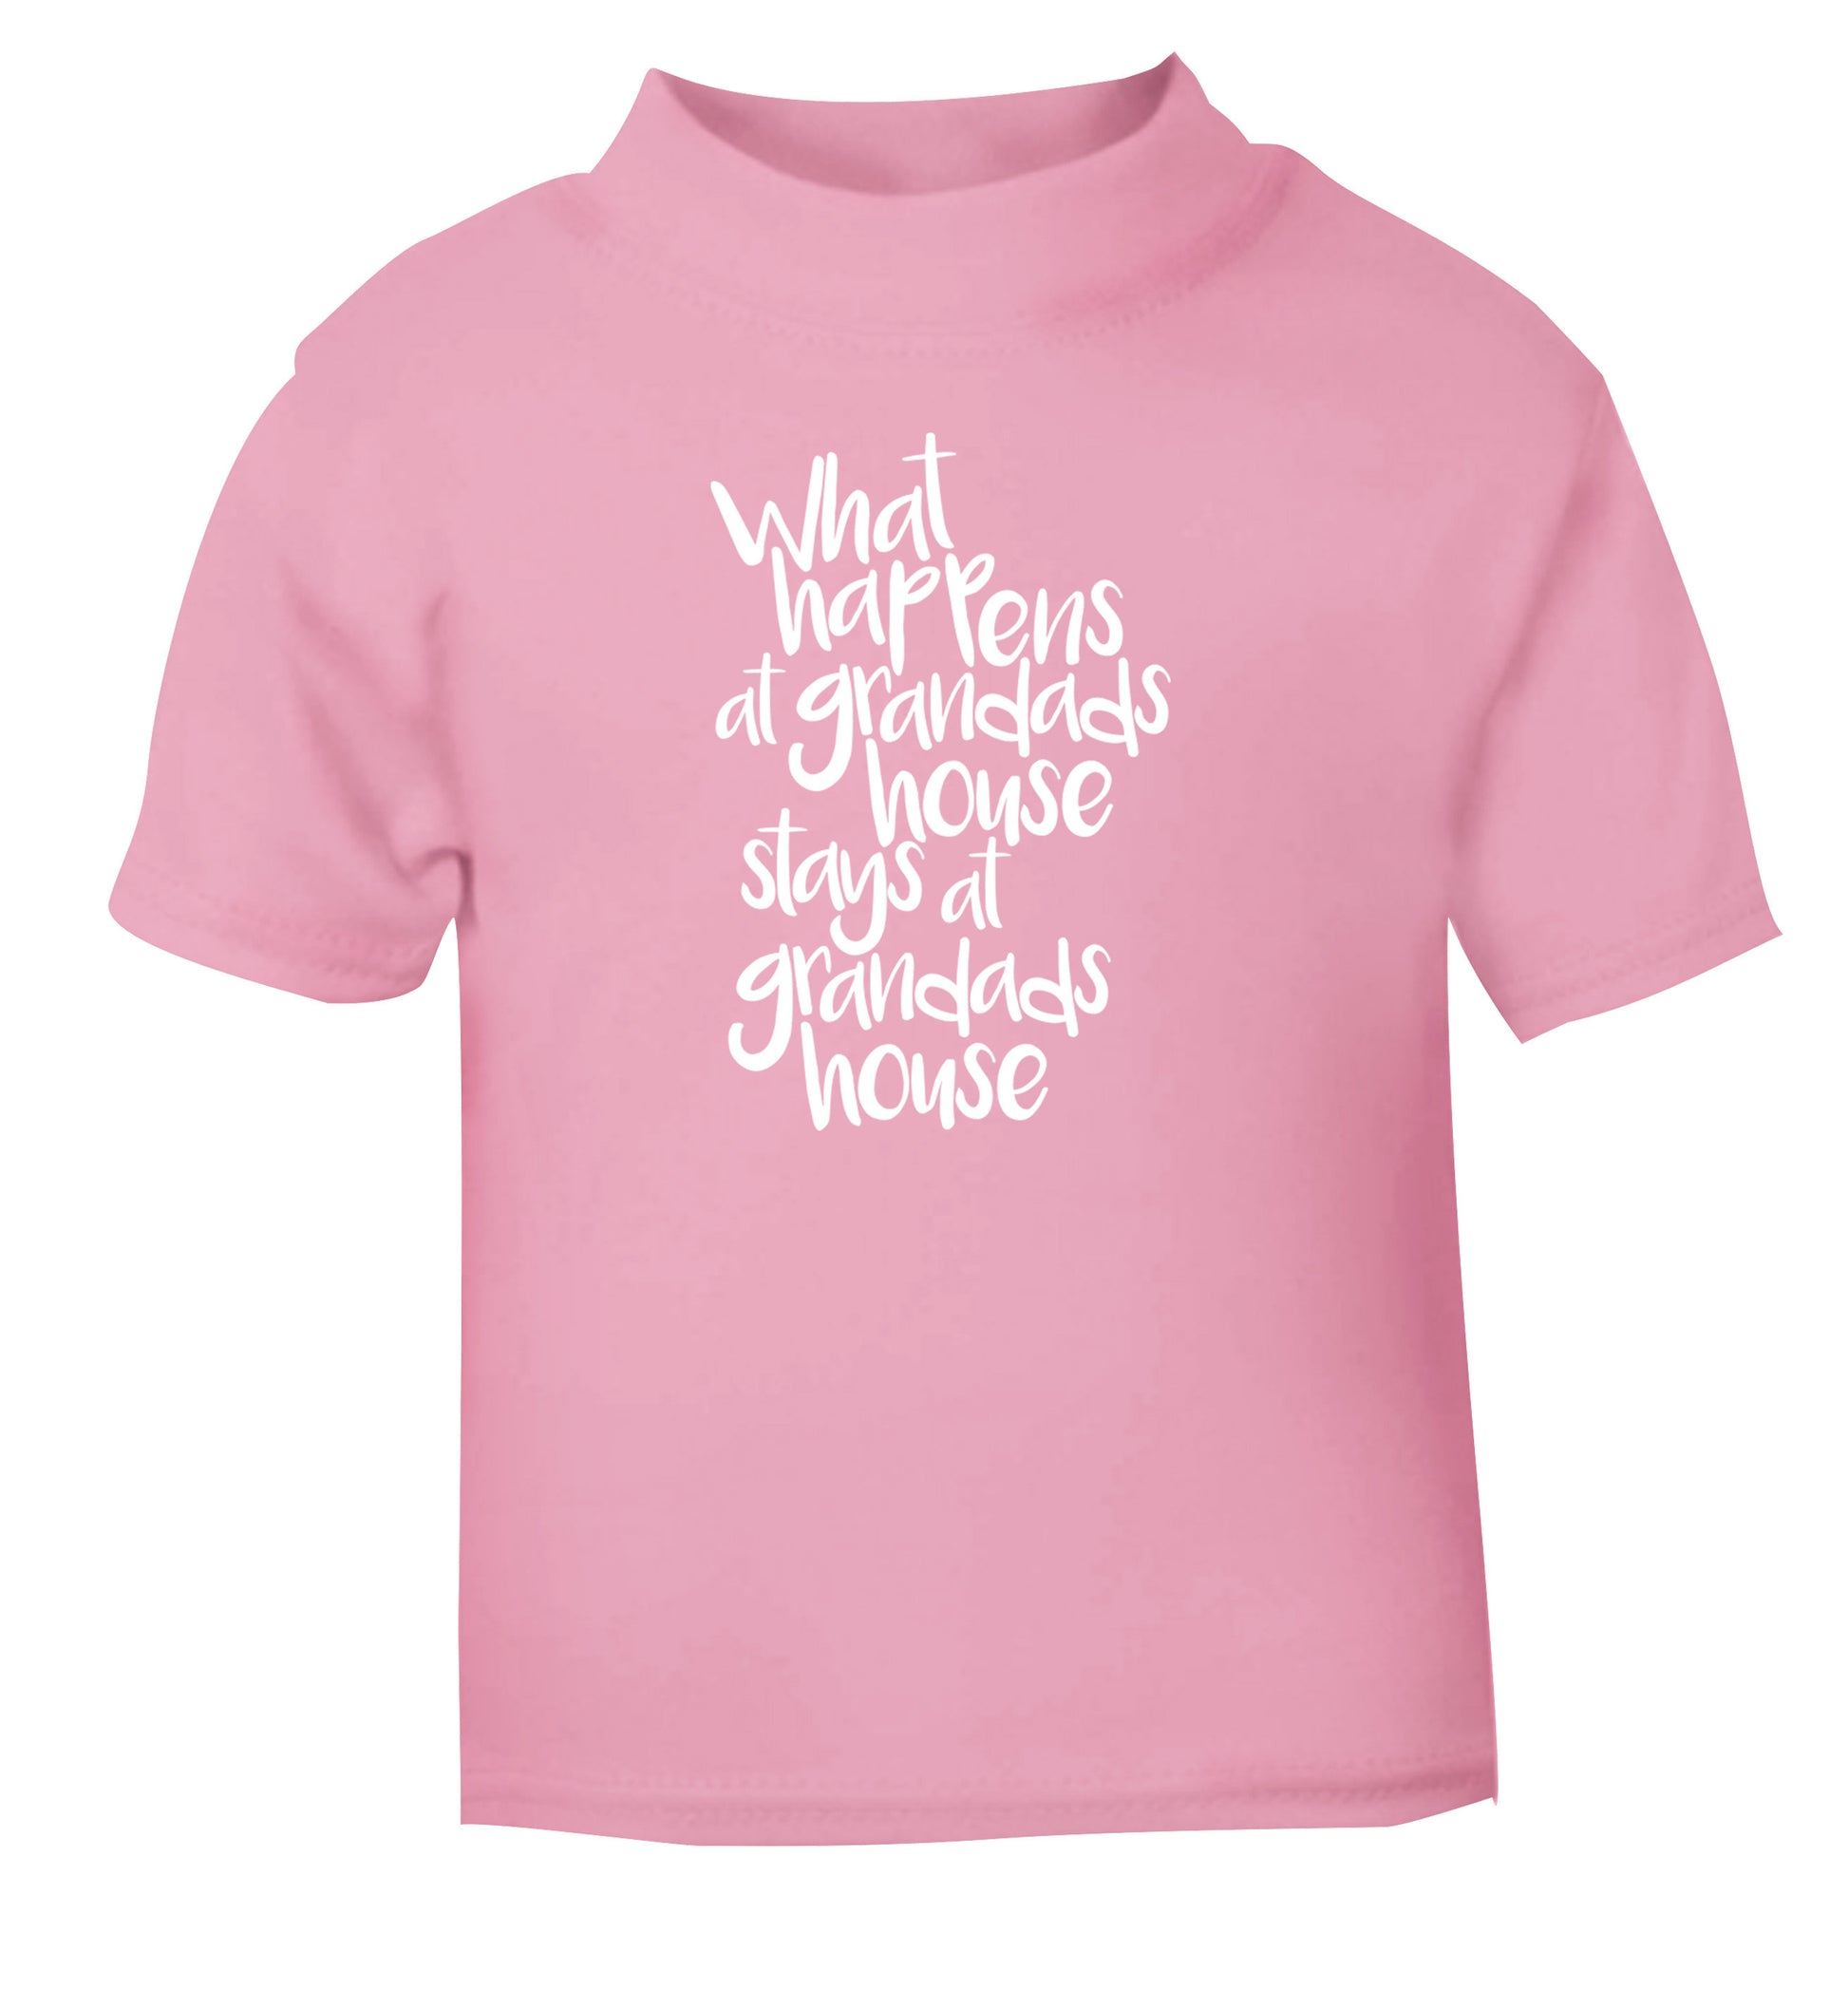 What happens at grandads house stays at grandads house light pink Baby Toddler Tshirt 2 Years